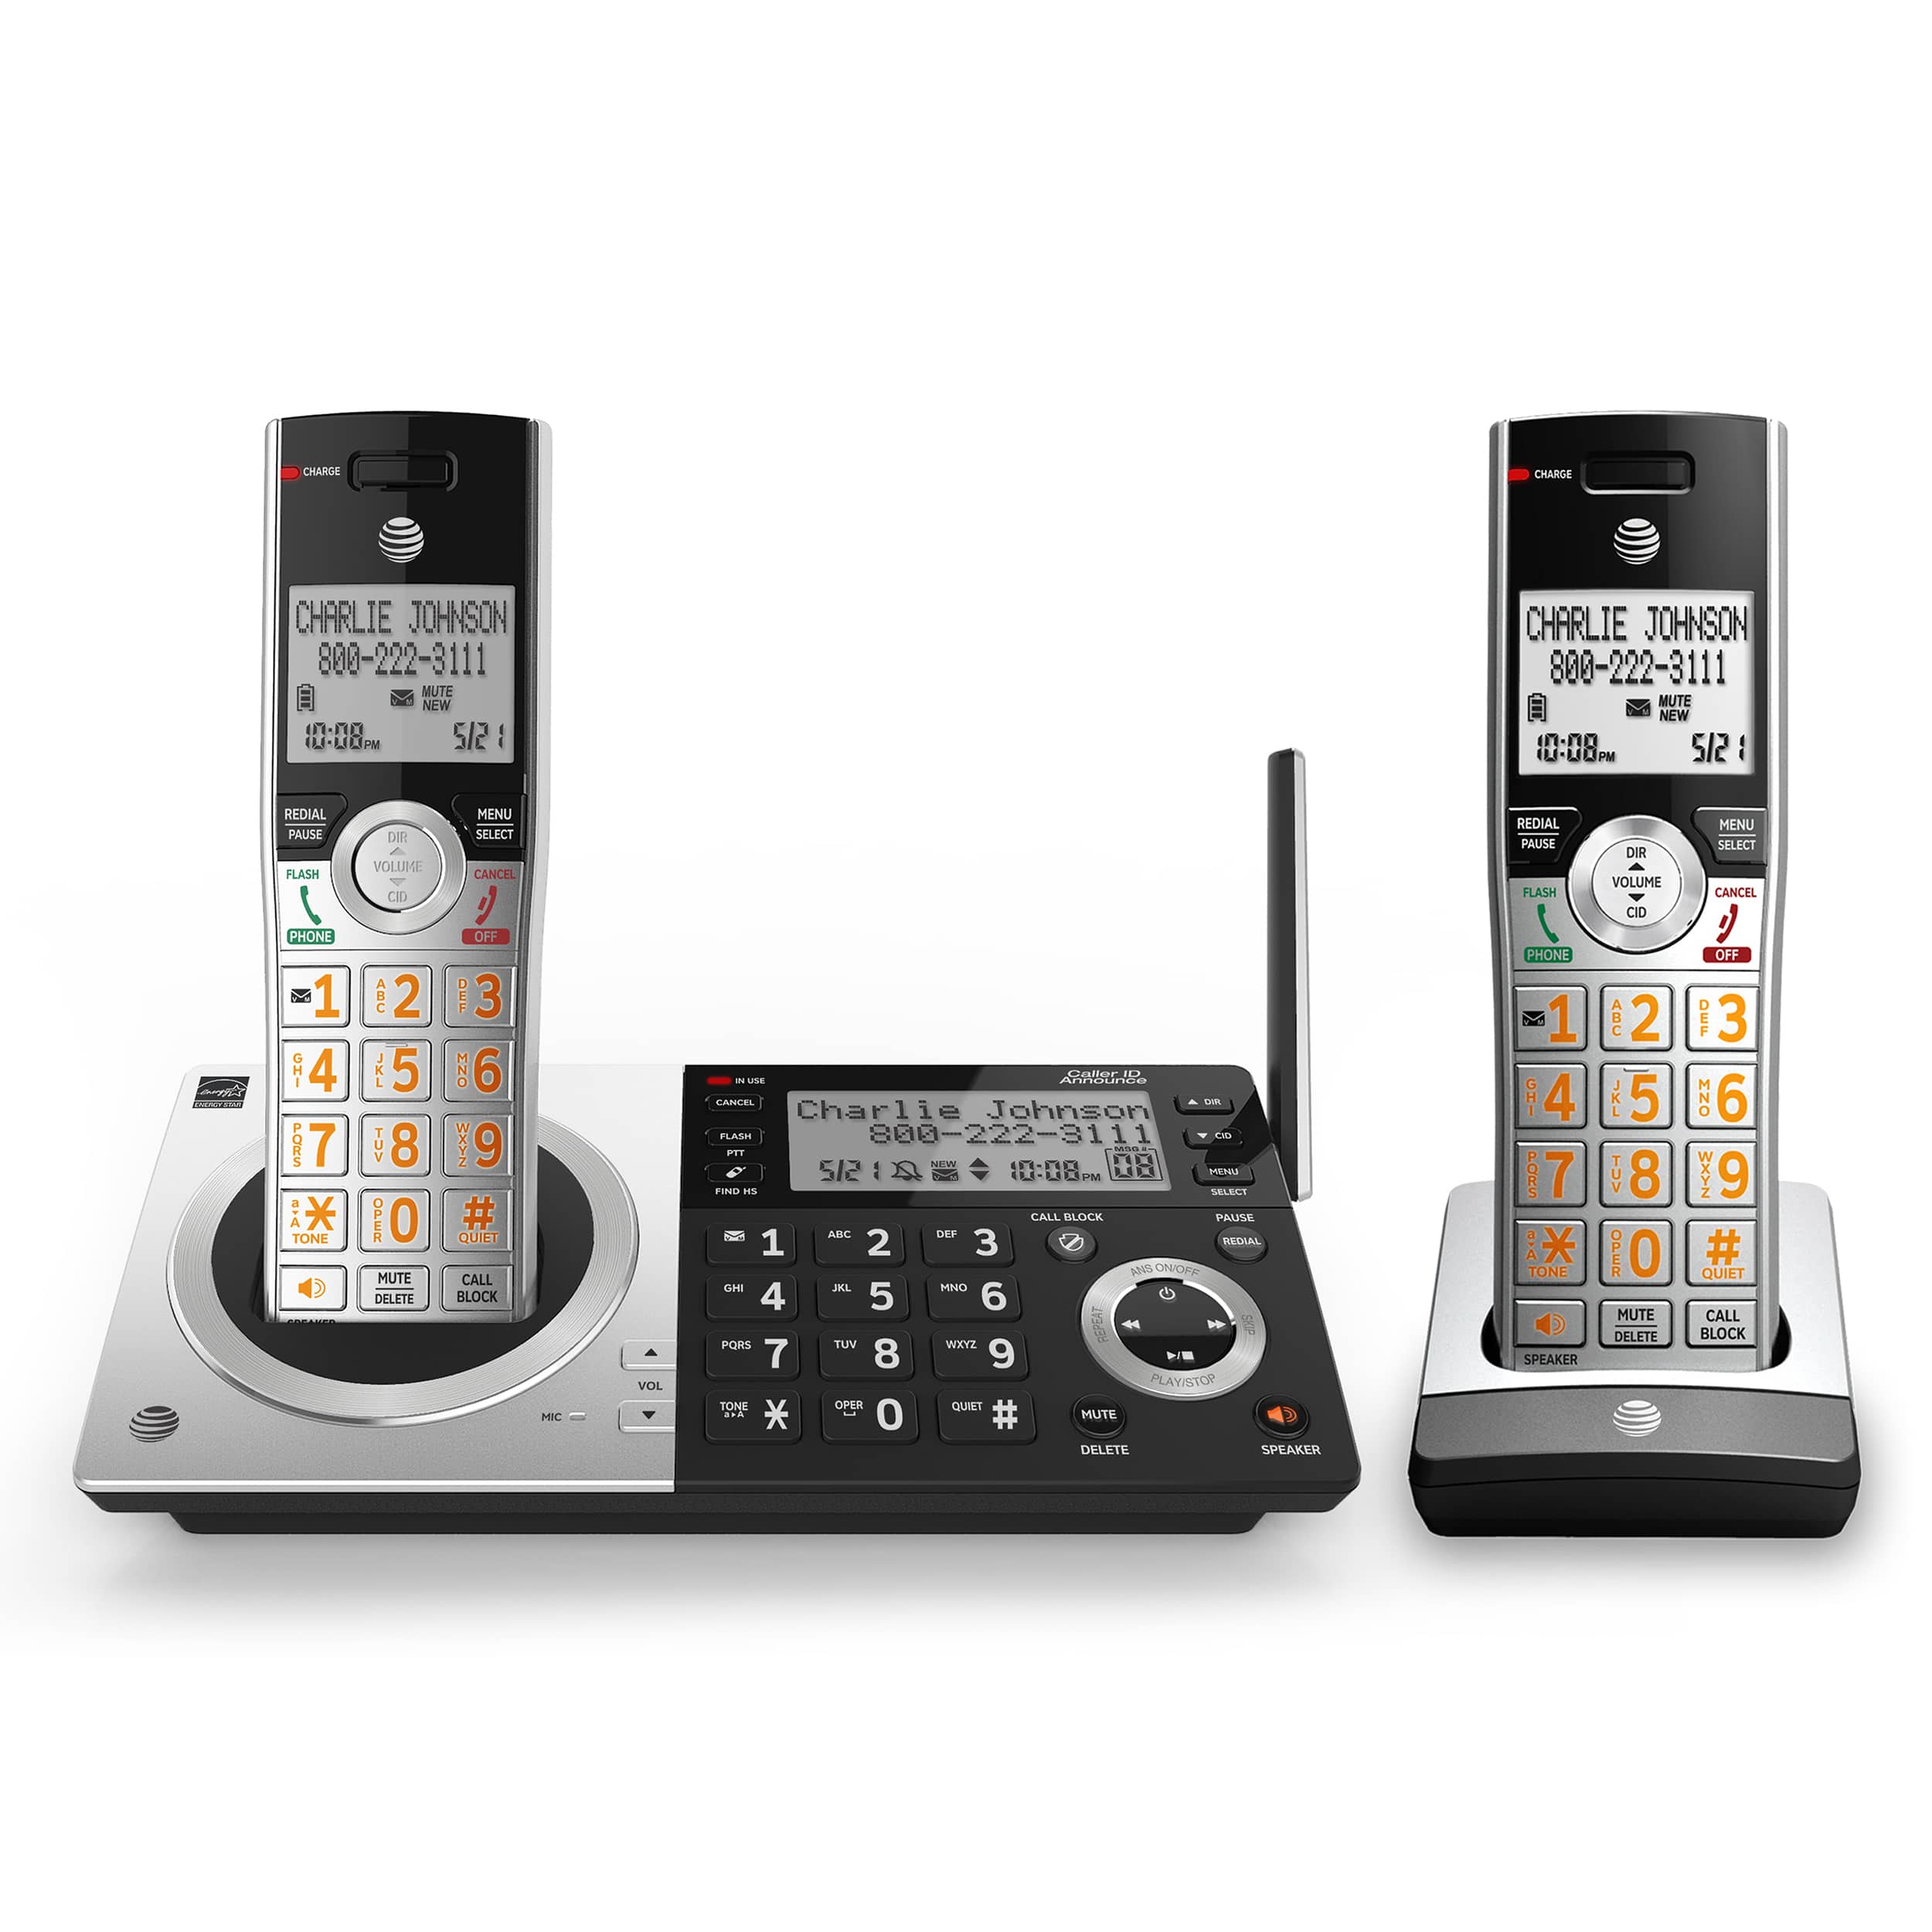 2 handset phone system with smart call blocker - view 1